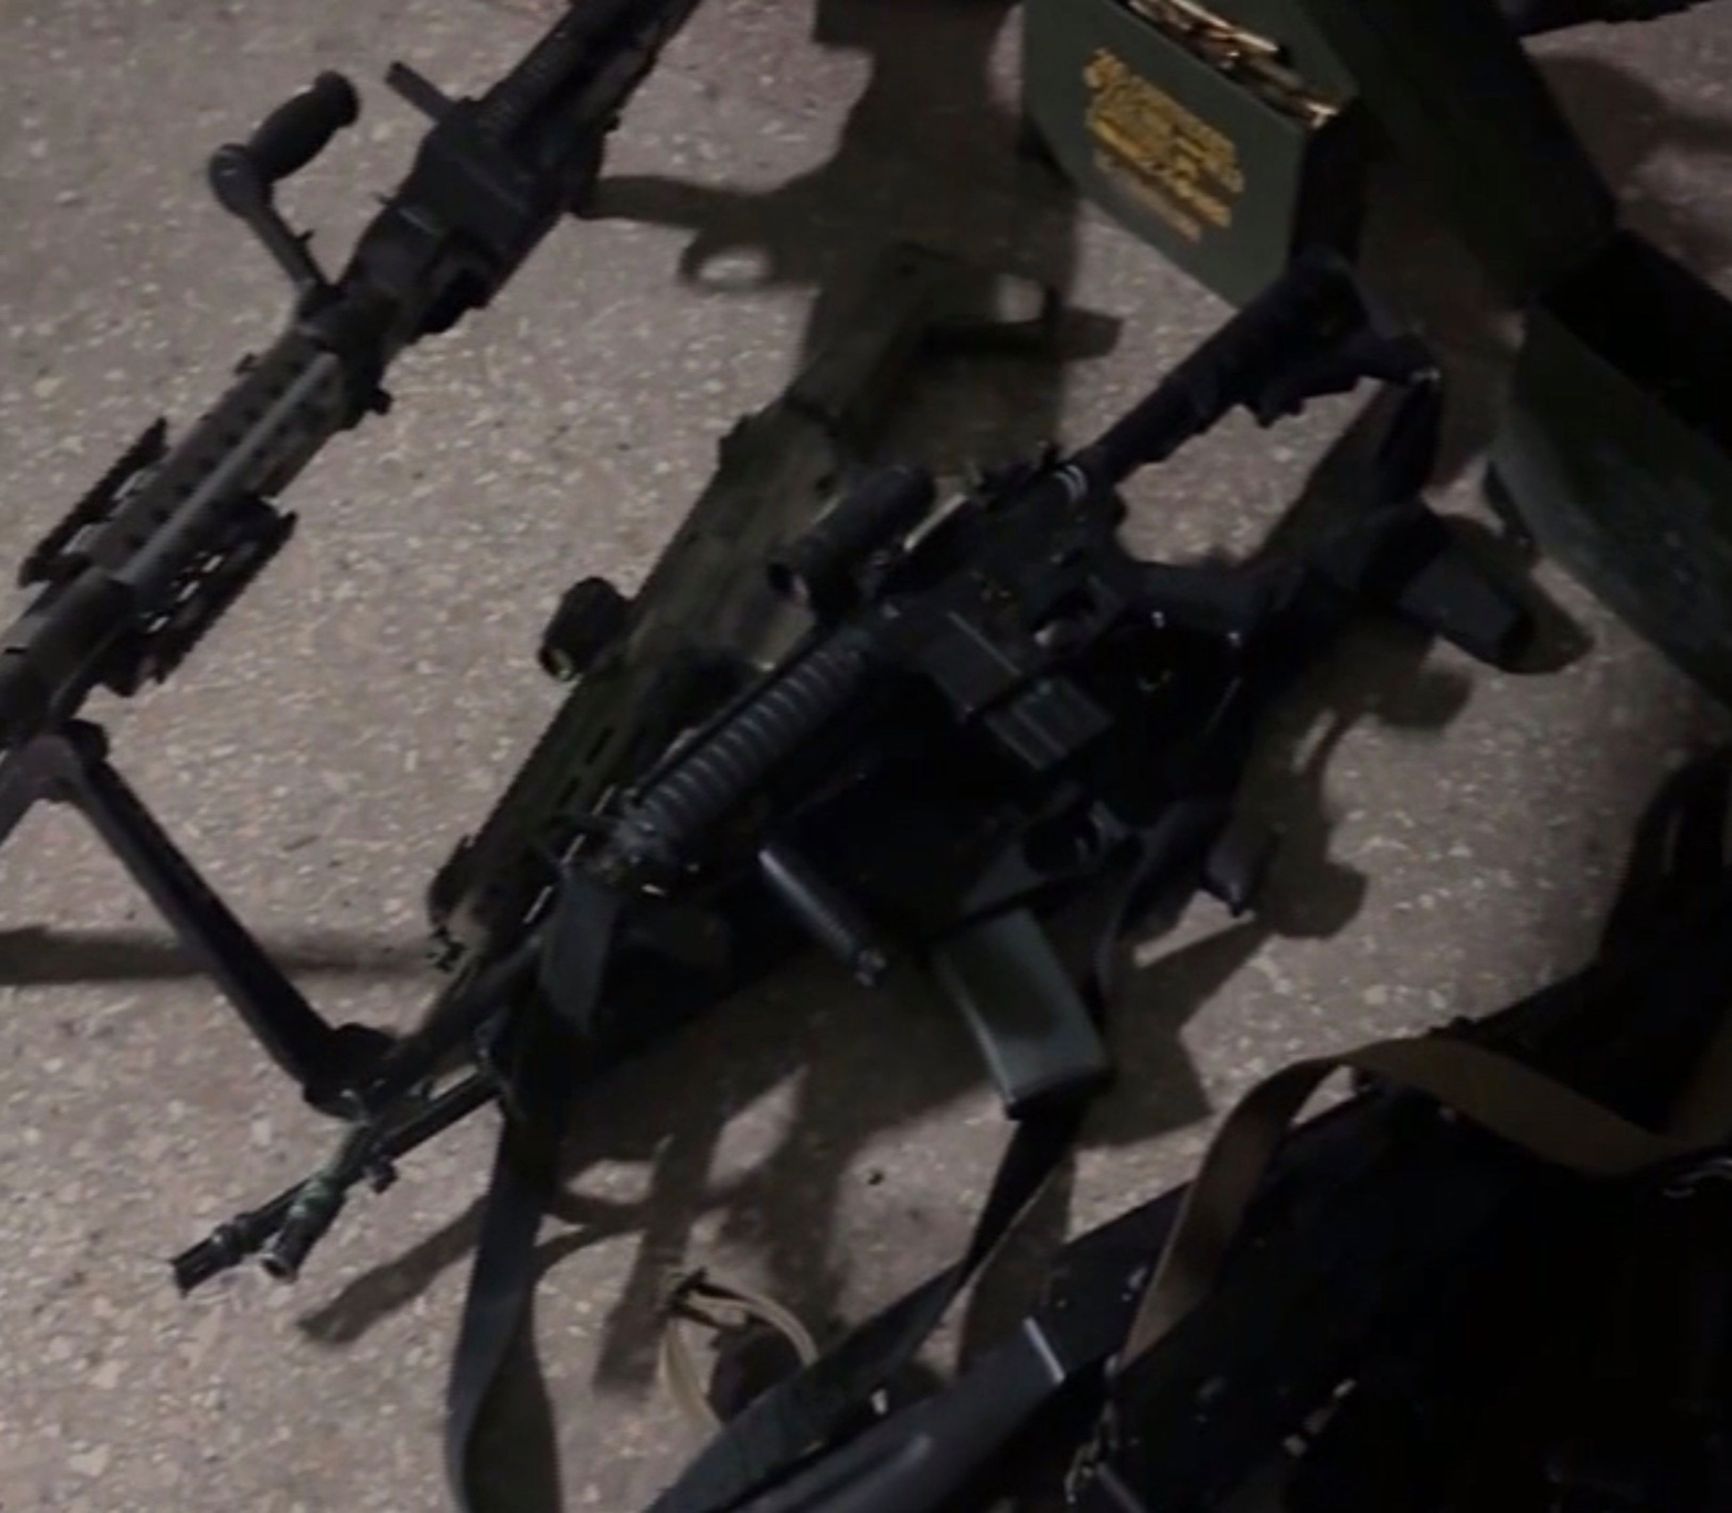 A screenshot from the video purportedly showing a shipment of weapons from Ukraine to Hamas